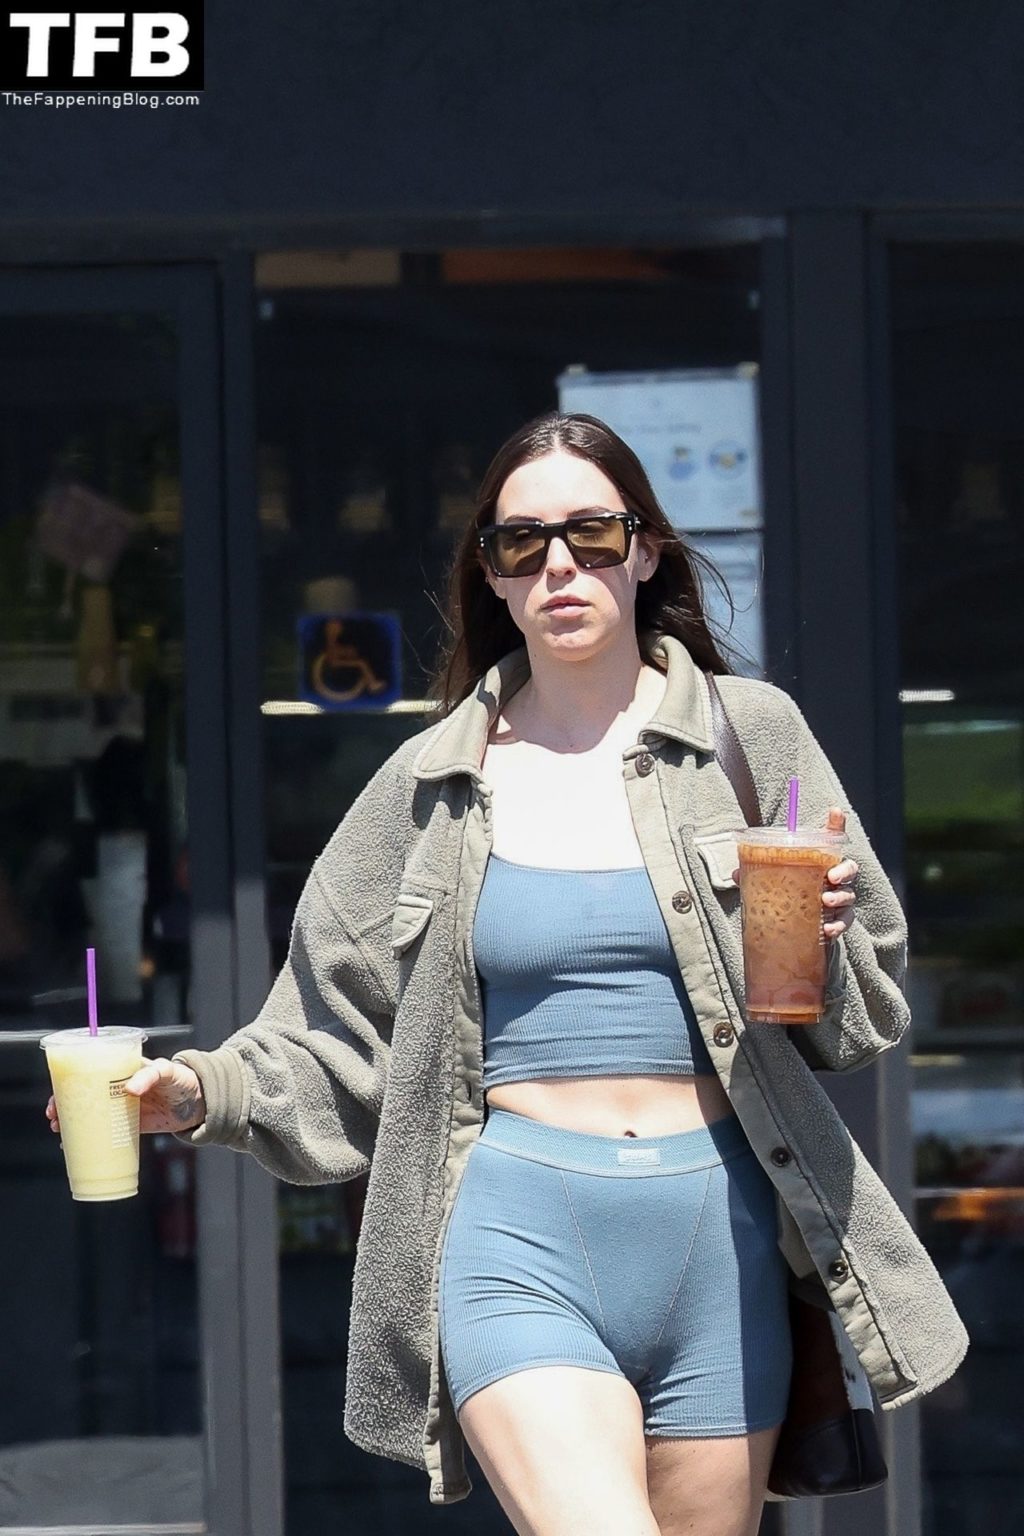 Scout Willis Stops by The Coffee Bean For Some Cold Drinks (25 Photos)